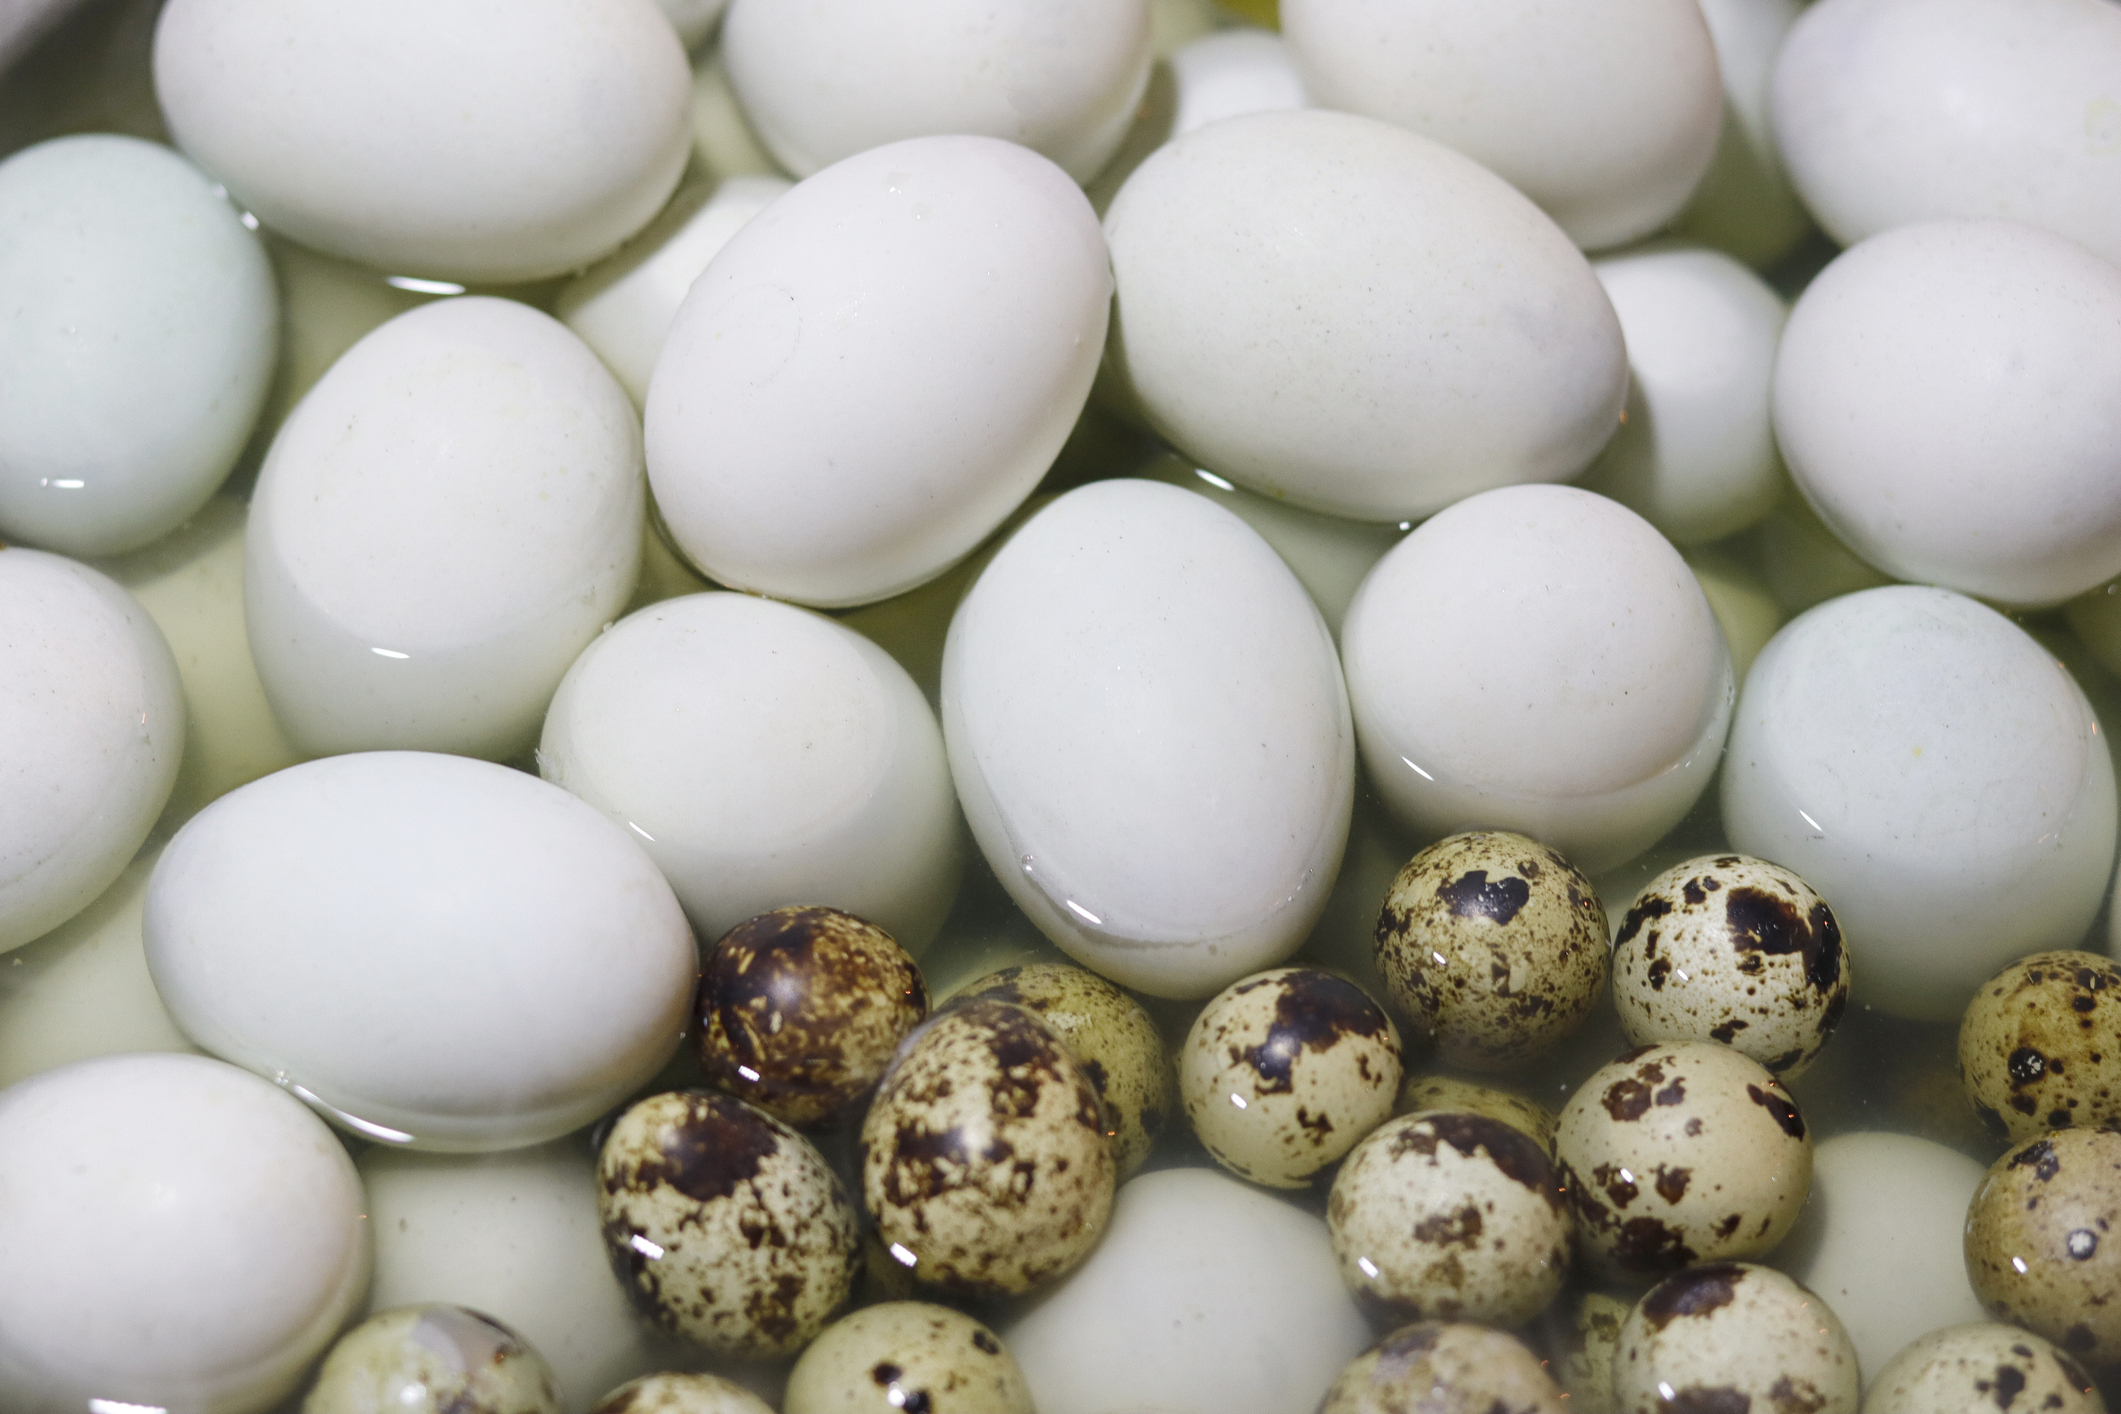 Various eggs, including larger white ones and smaller speckled ones, soaking in water